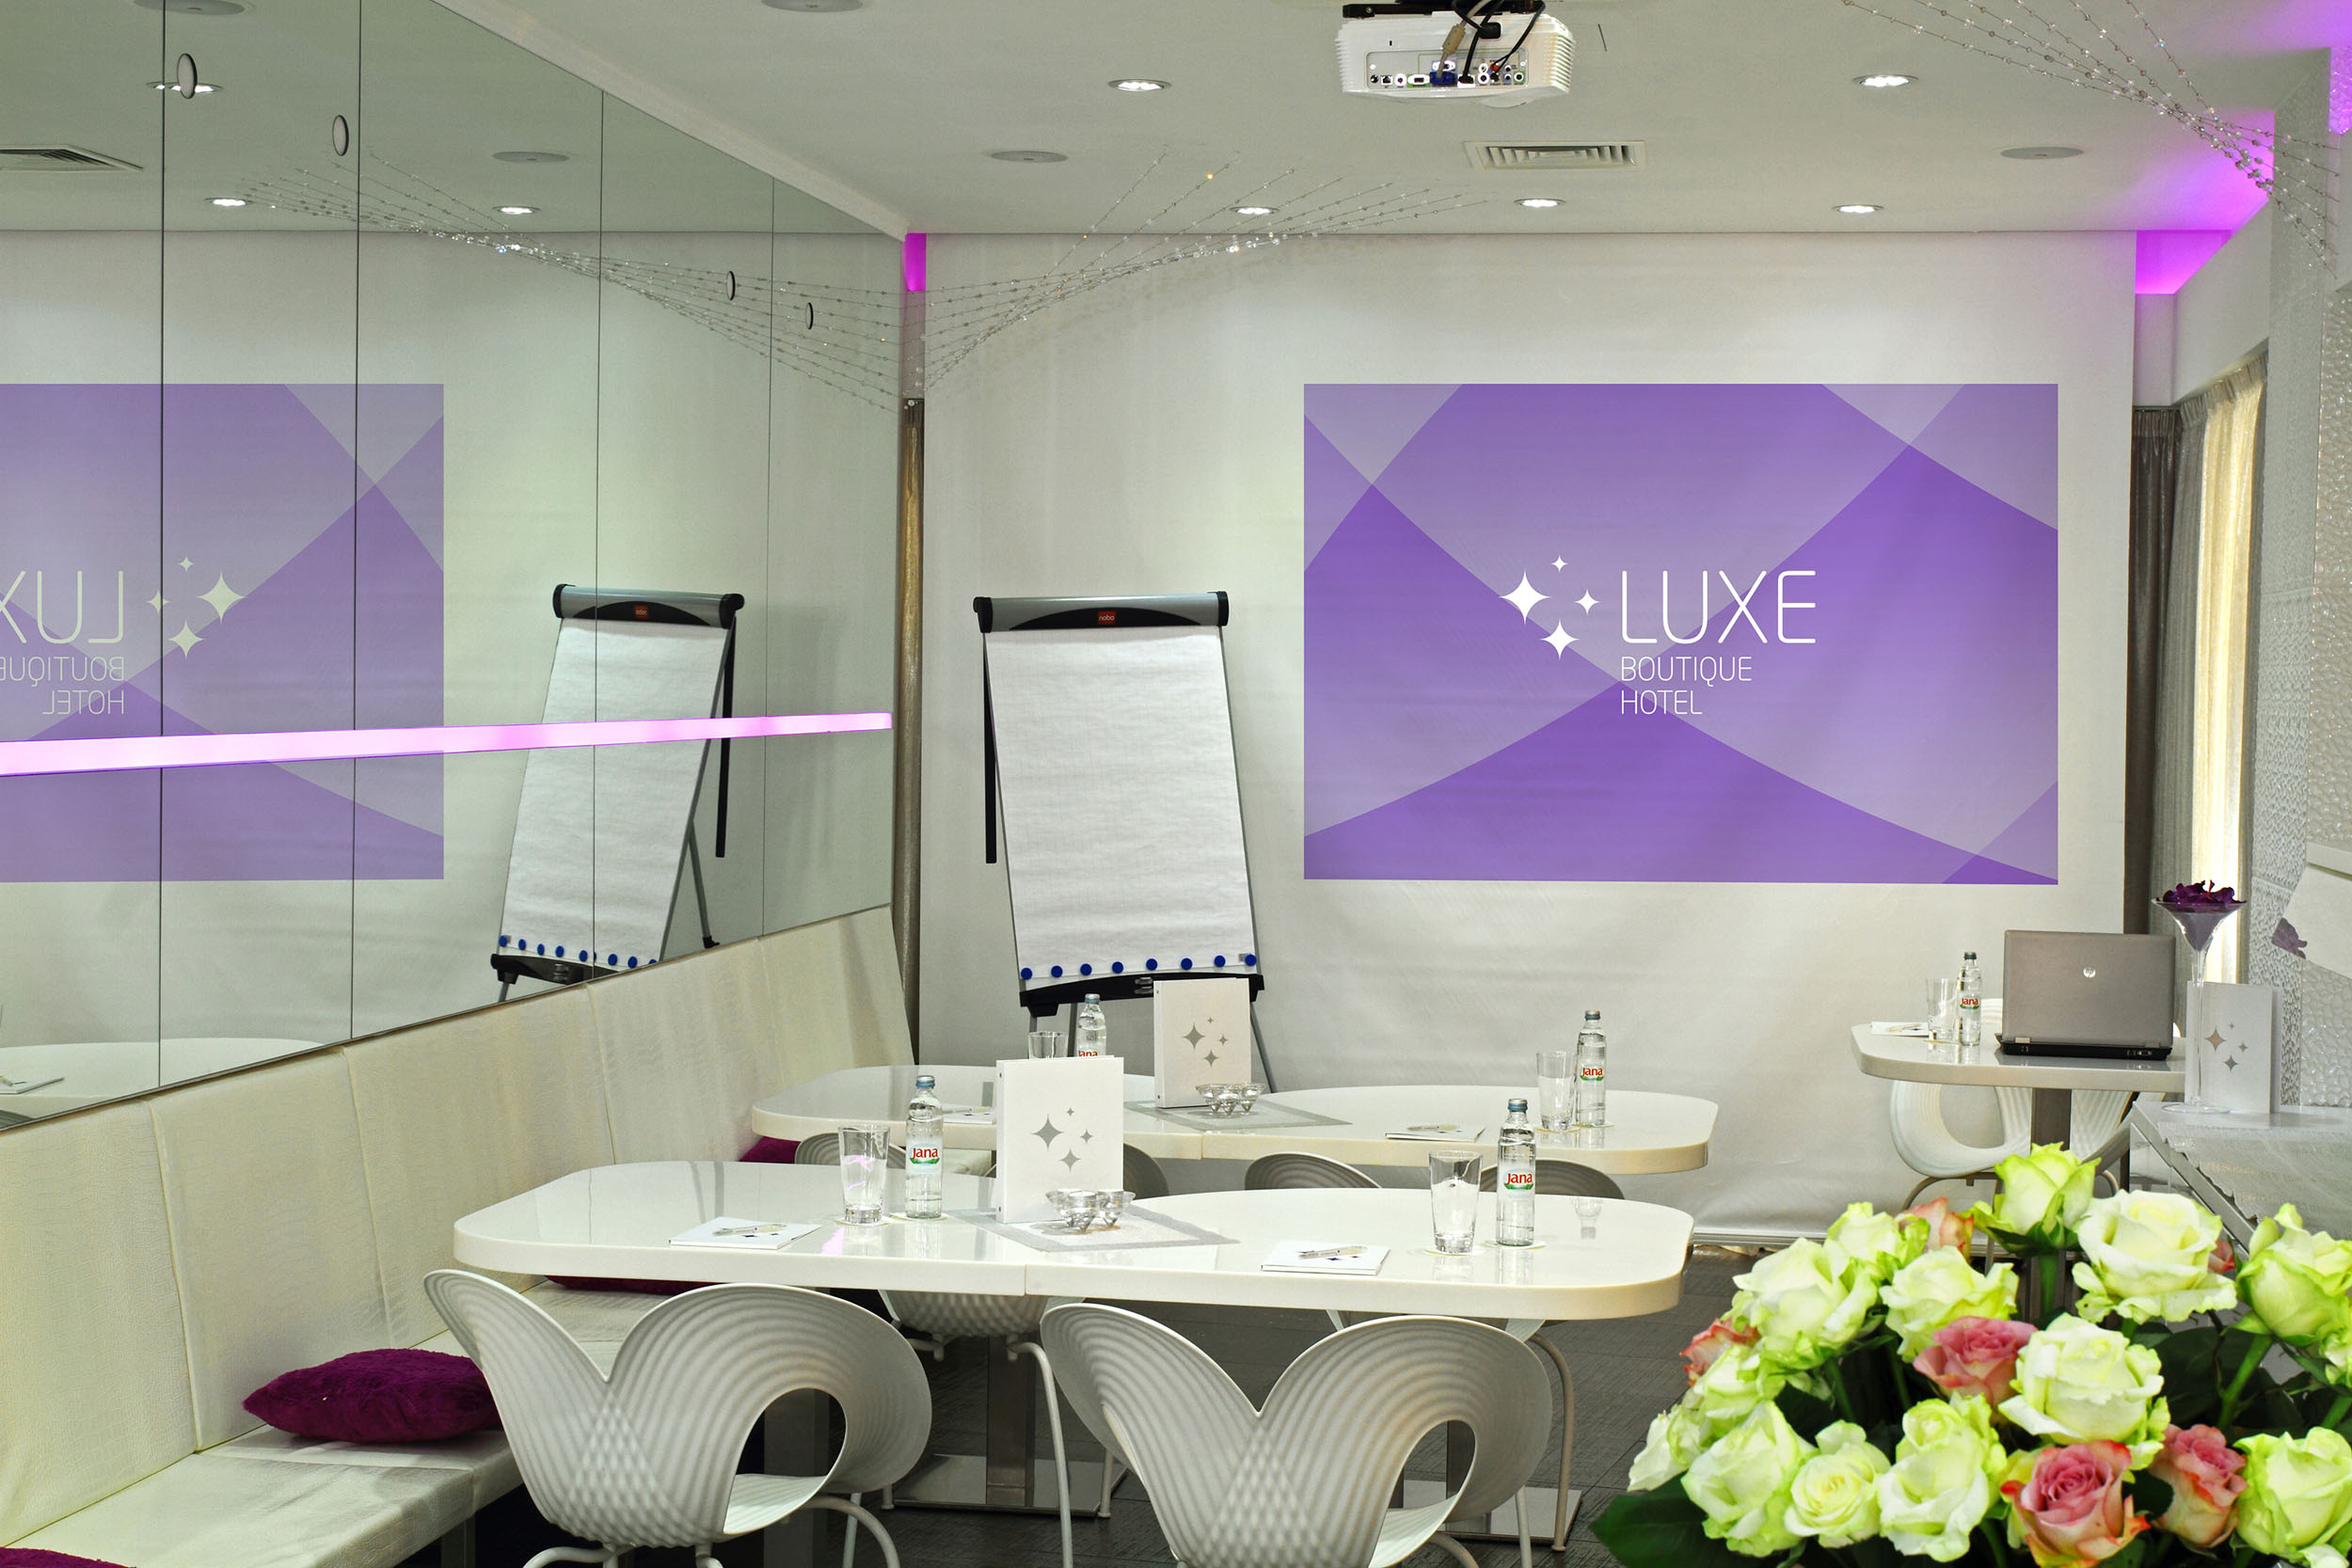 Luxe meetings and incentives